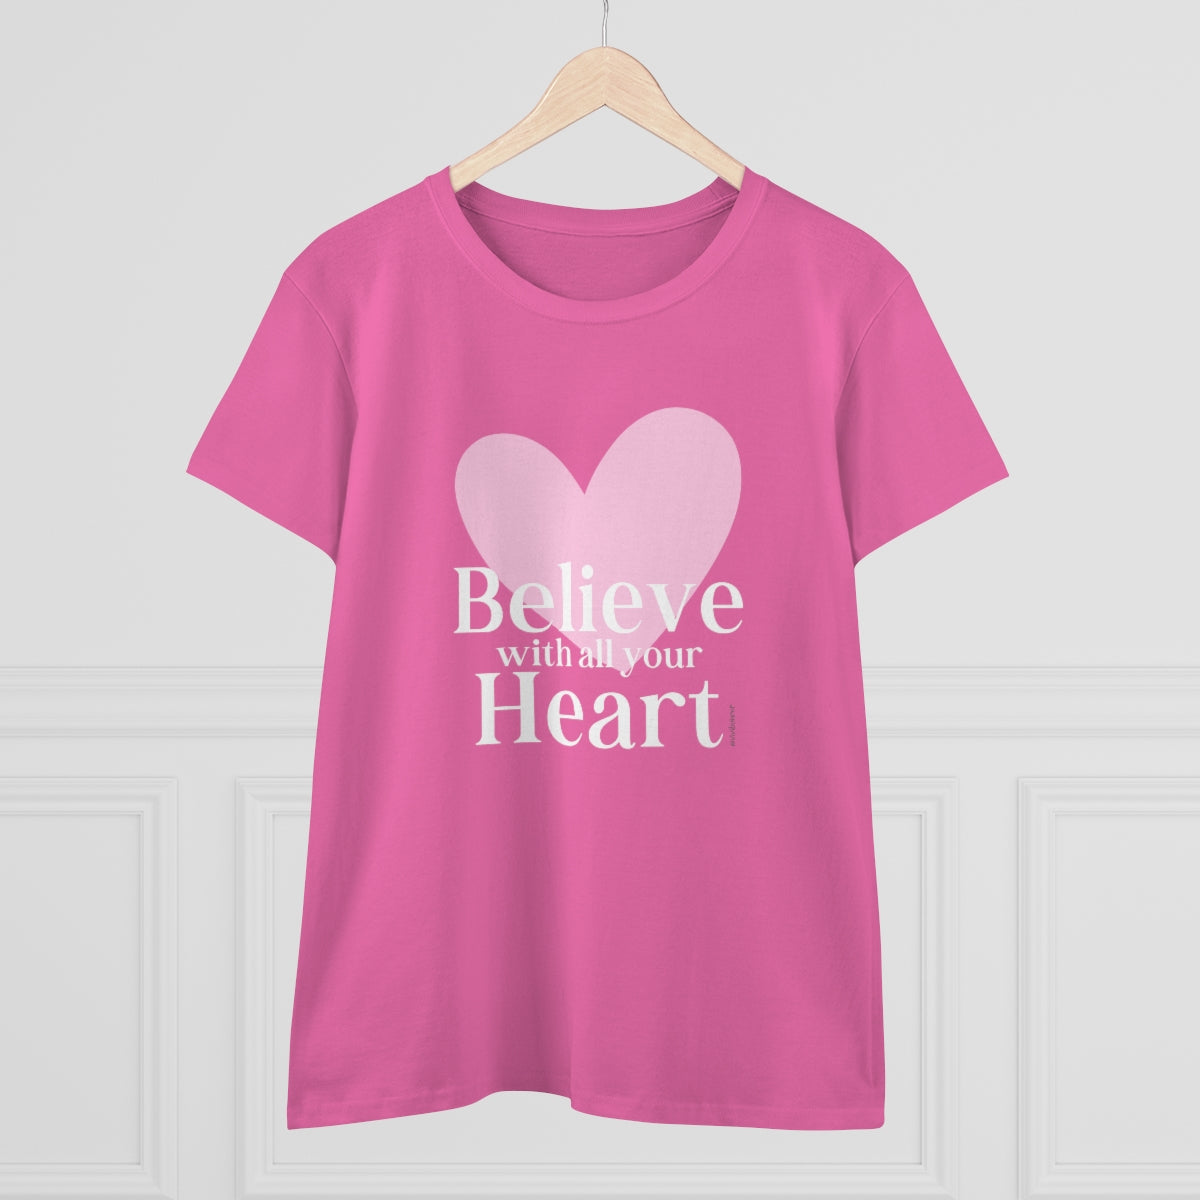 BELIEVE with all your Heart ♡.: Women's Midweight 100% Cotton Tee (Semi-fitted)